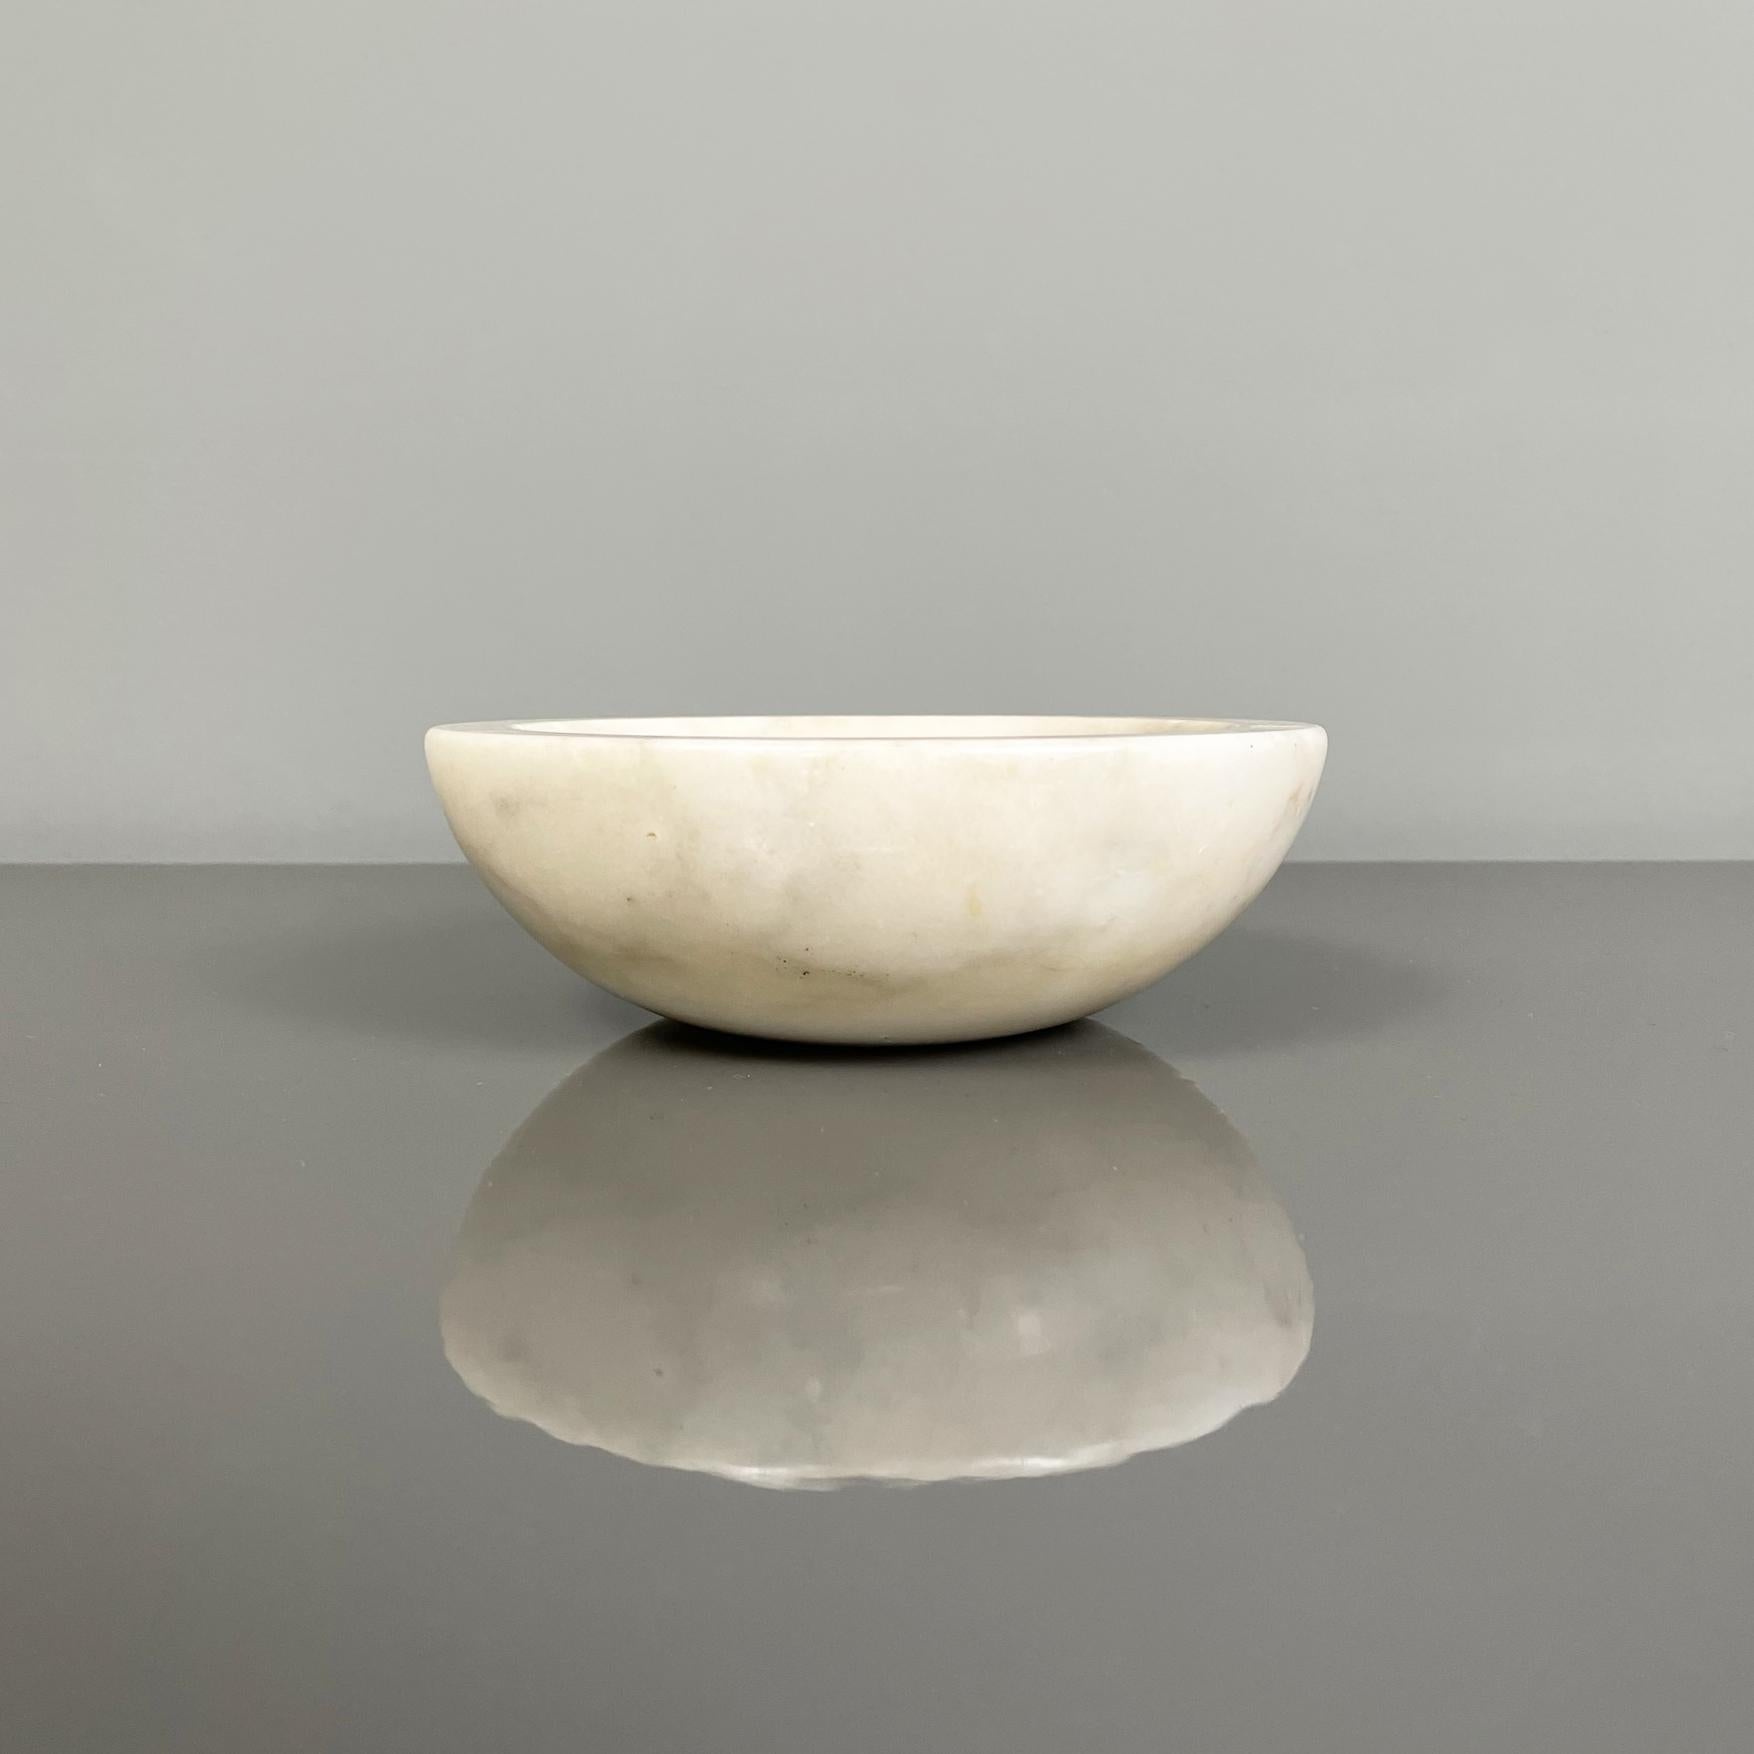 Italian mid-century modern Round bowl centerpiece in light marble, 1970s
Elegant centerpiece with round base, in light marble. This bowl with a hemispherical silhouette features a thick contour.
It came from 1970s
This decorative bowl is in very